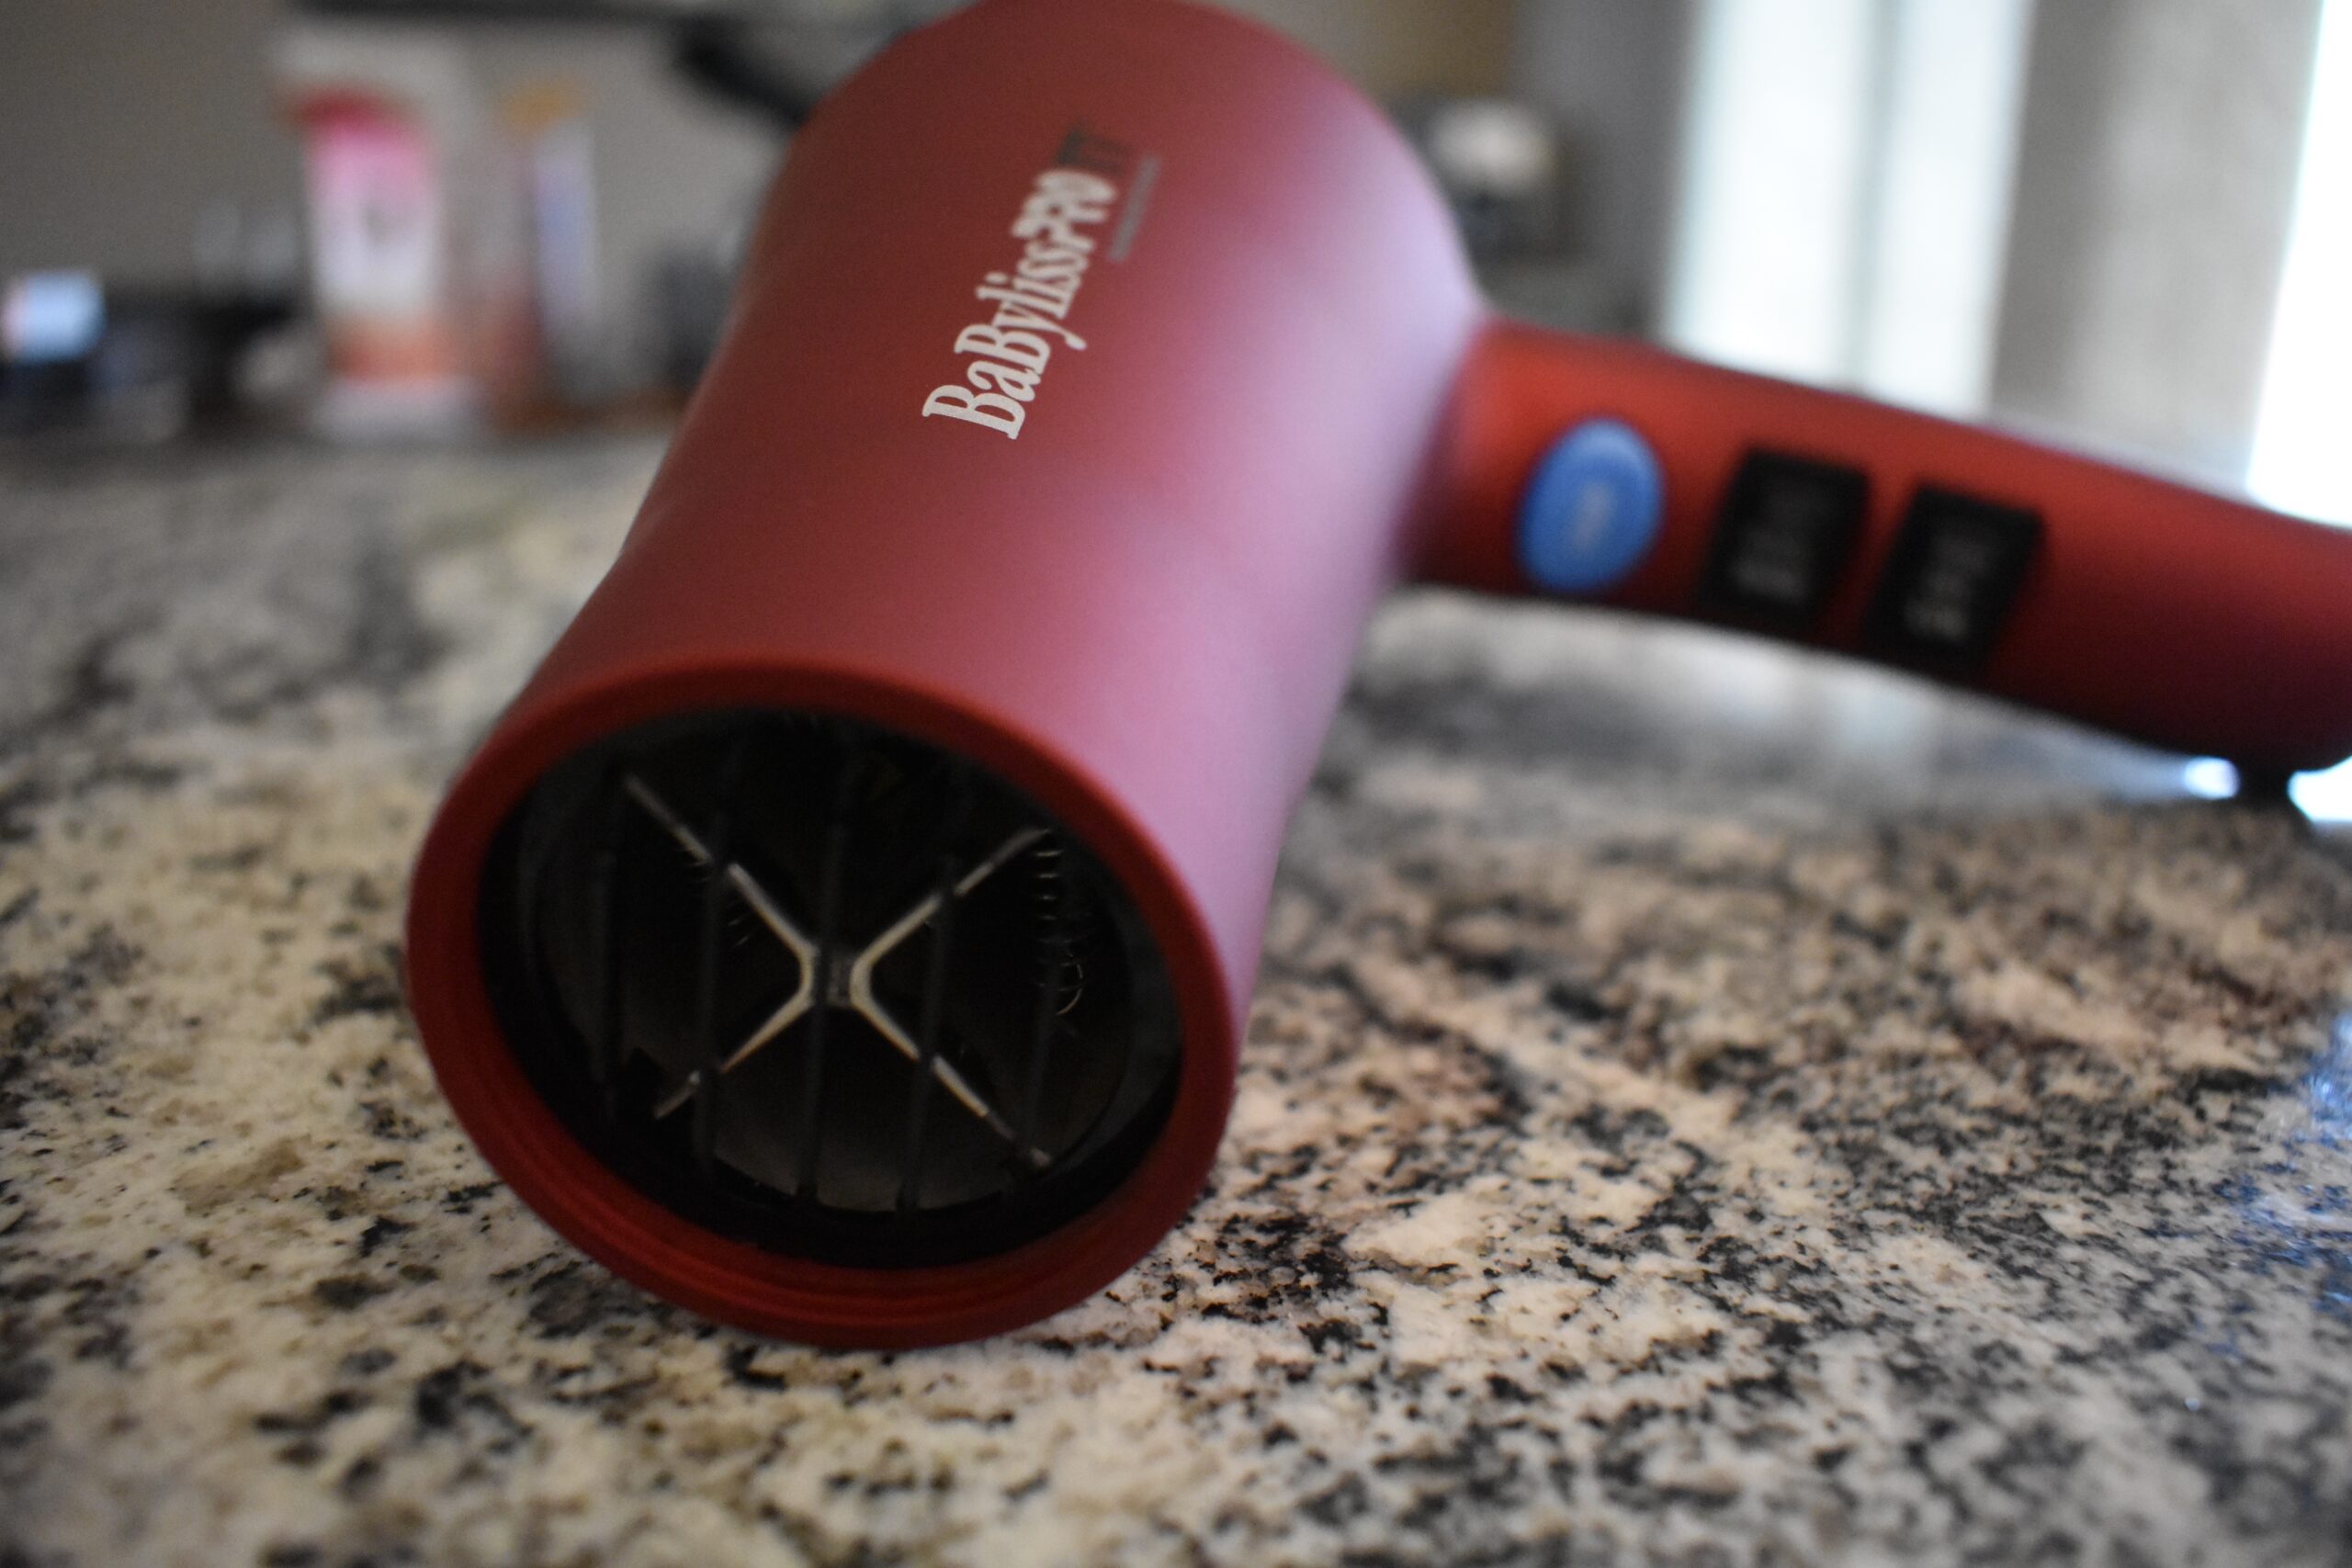 The front of the Babyliss Pro TT hair dryer